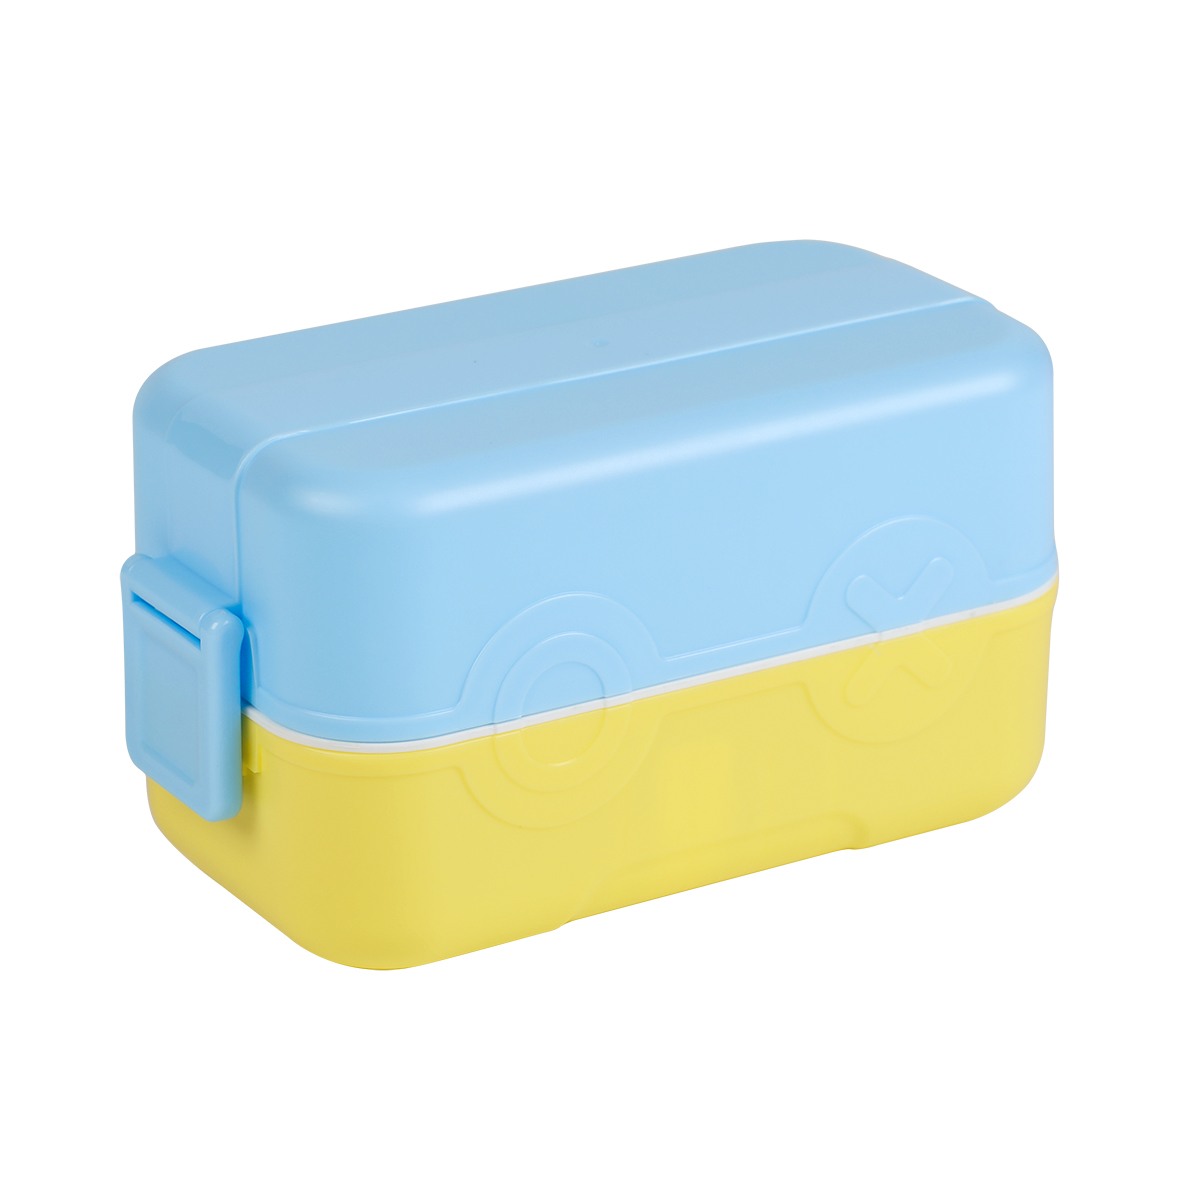 BPA-Free Bento Box Lunch Box Leak-Proof 3 Compartments Bento Box Kit With Detachable Divider